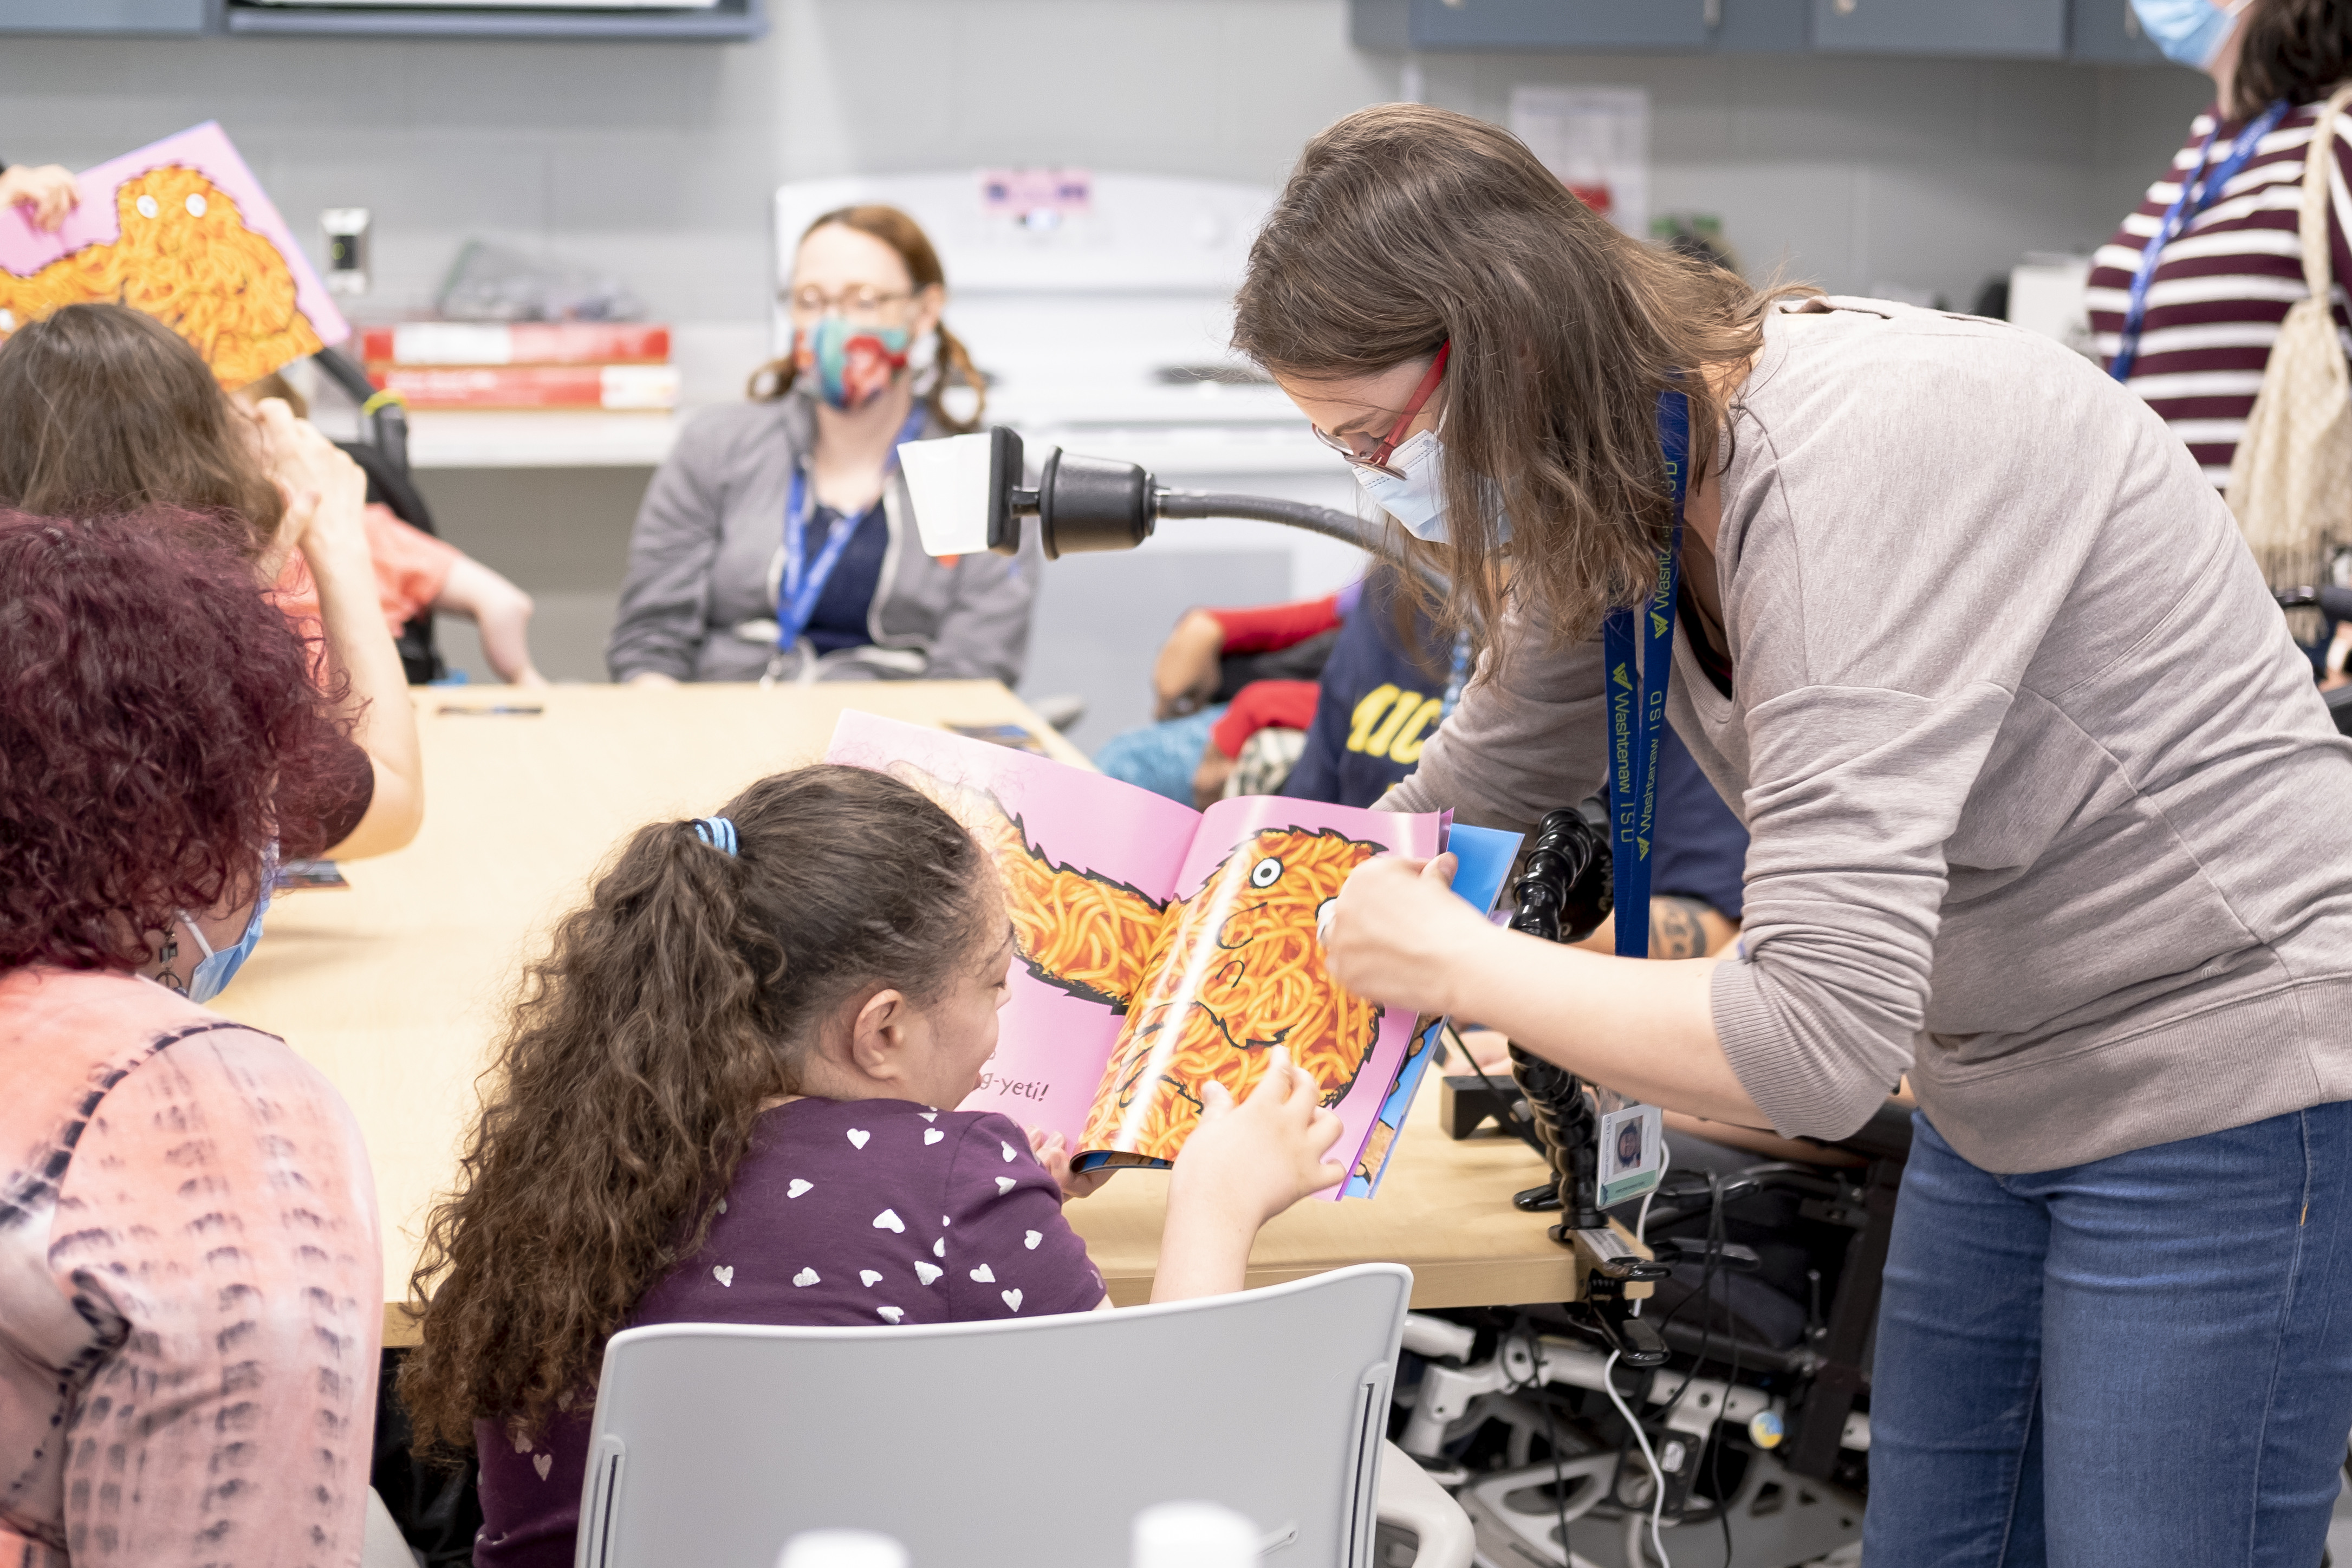 A girl who is sitting at a table full of students and teachers touches a colorful illustrated book that her teacher is holding open.